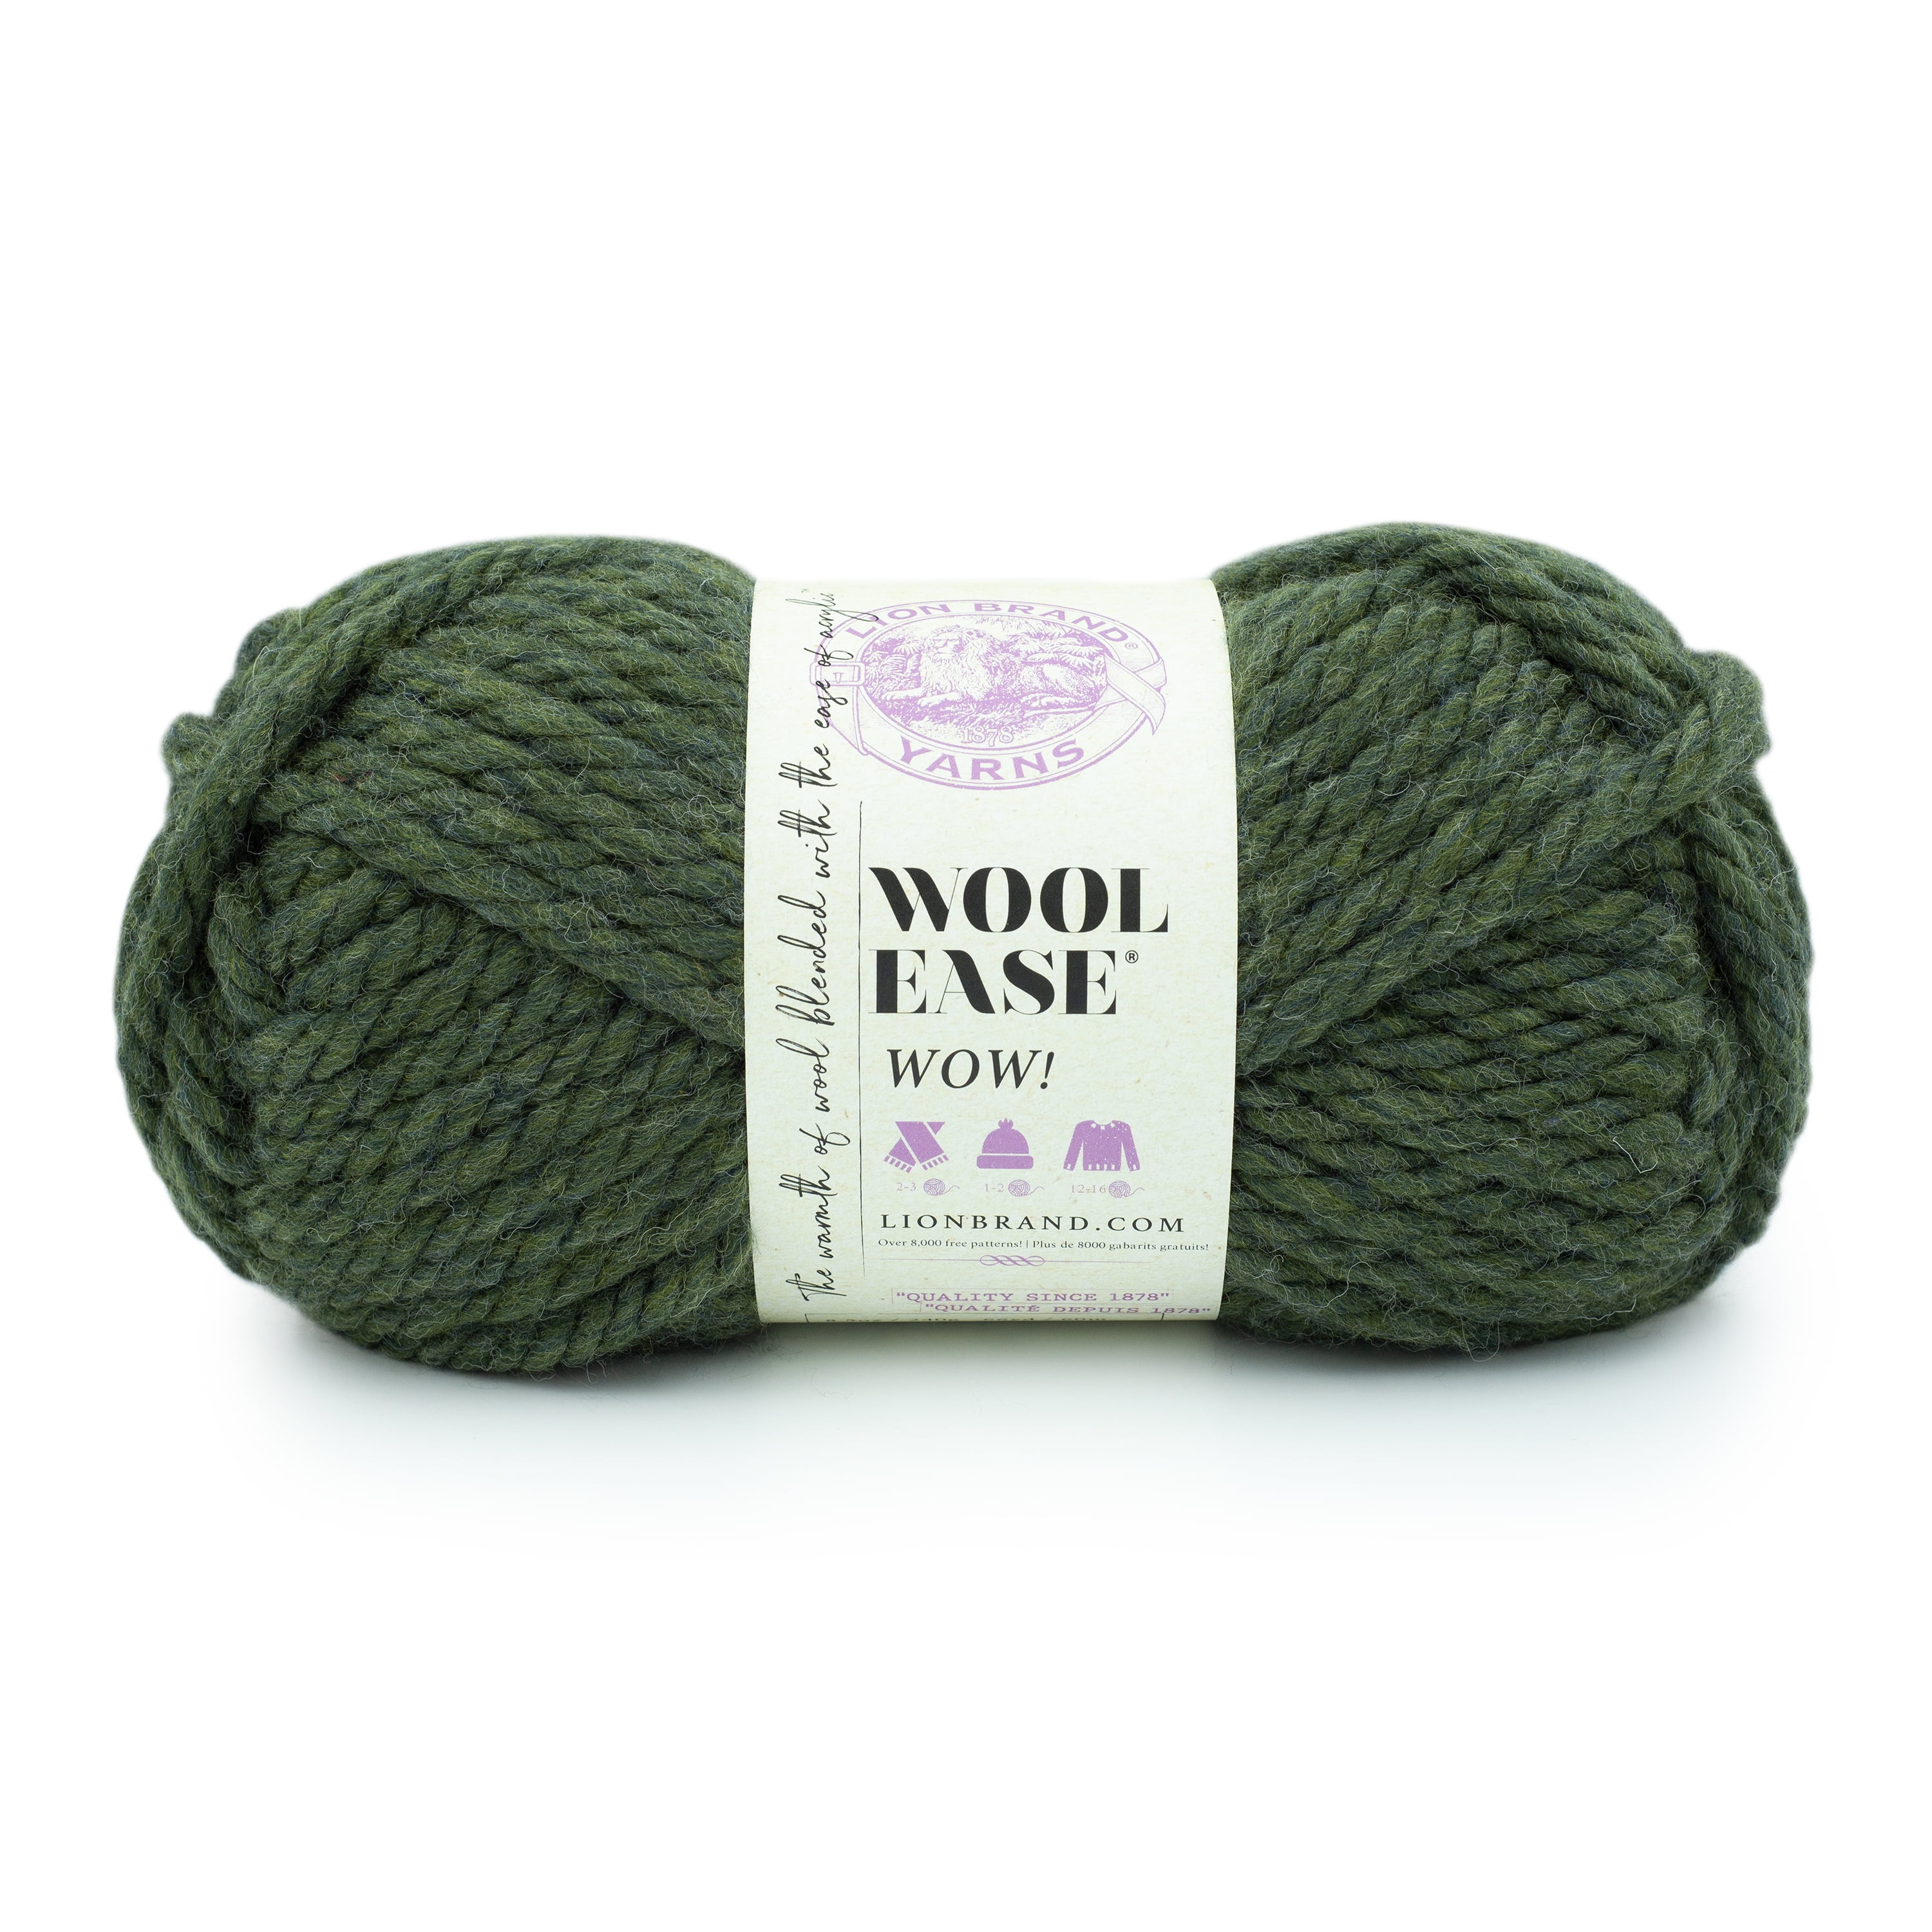 Lion Brand Yarn Wool-Ease Thick & Quick Yarn, Soft and Bulky Yarn for  Knitting, Crocheting, and Crafting, 1 Skein, Fairy : : Home